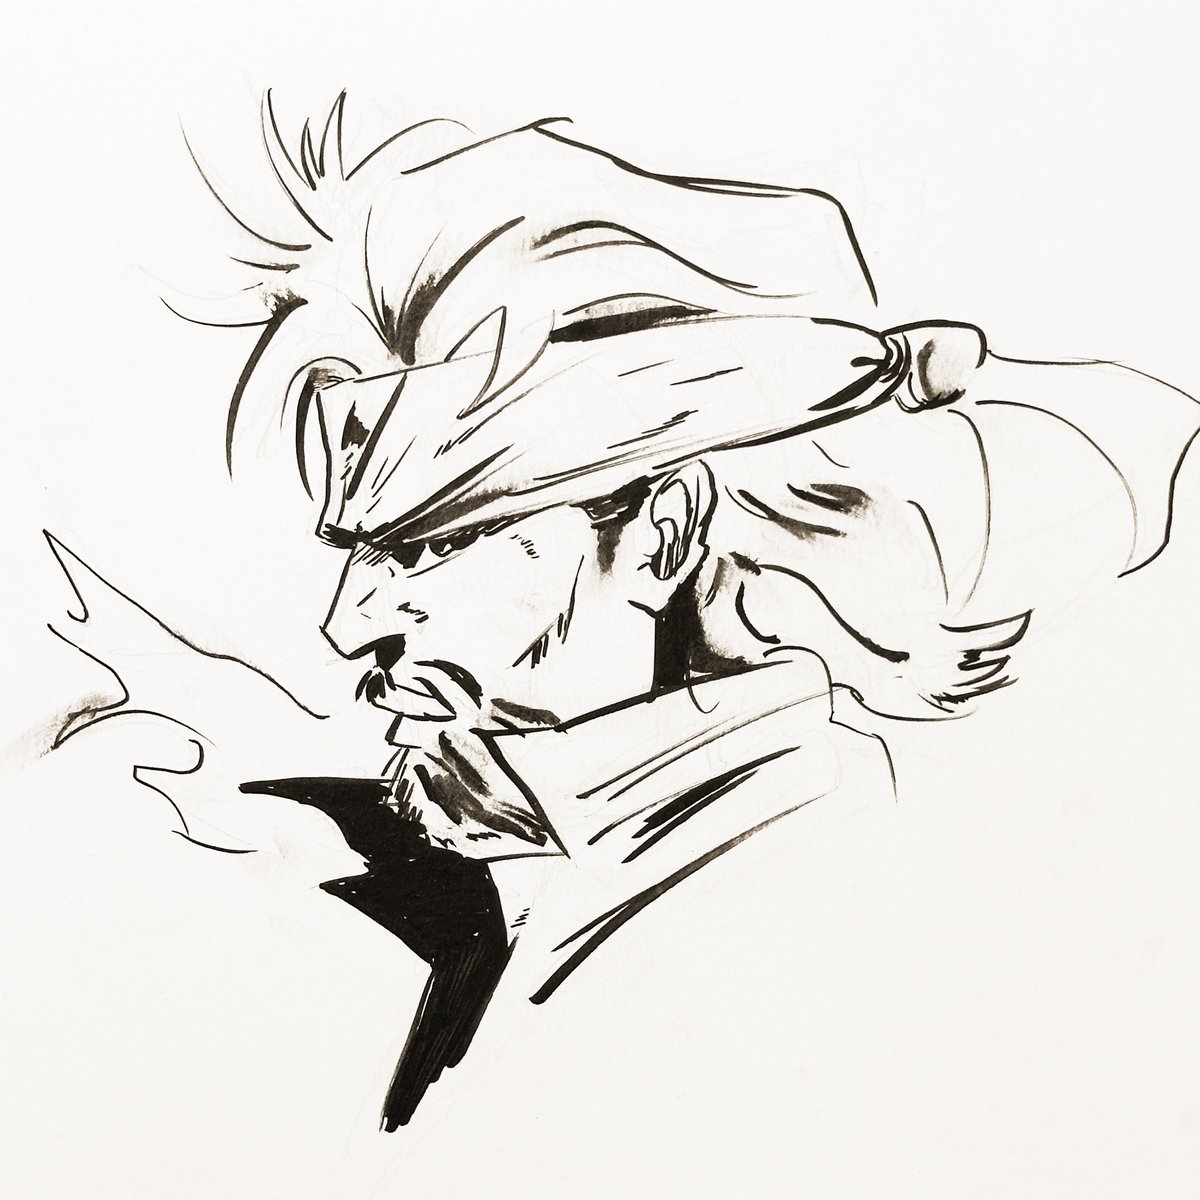 Behold! The first ever collab between @psyliws and I, when we were prepping for @comicconla and testing out our live commission skills. For a first run with me doing pencils and him doing inks, turned out real swell! #metalgearsolid3